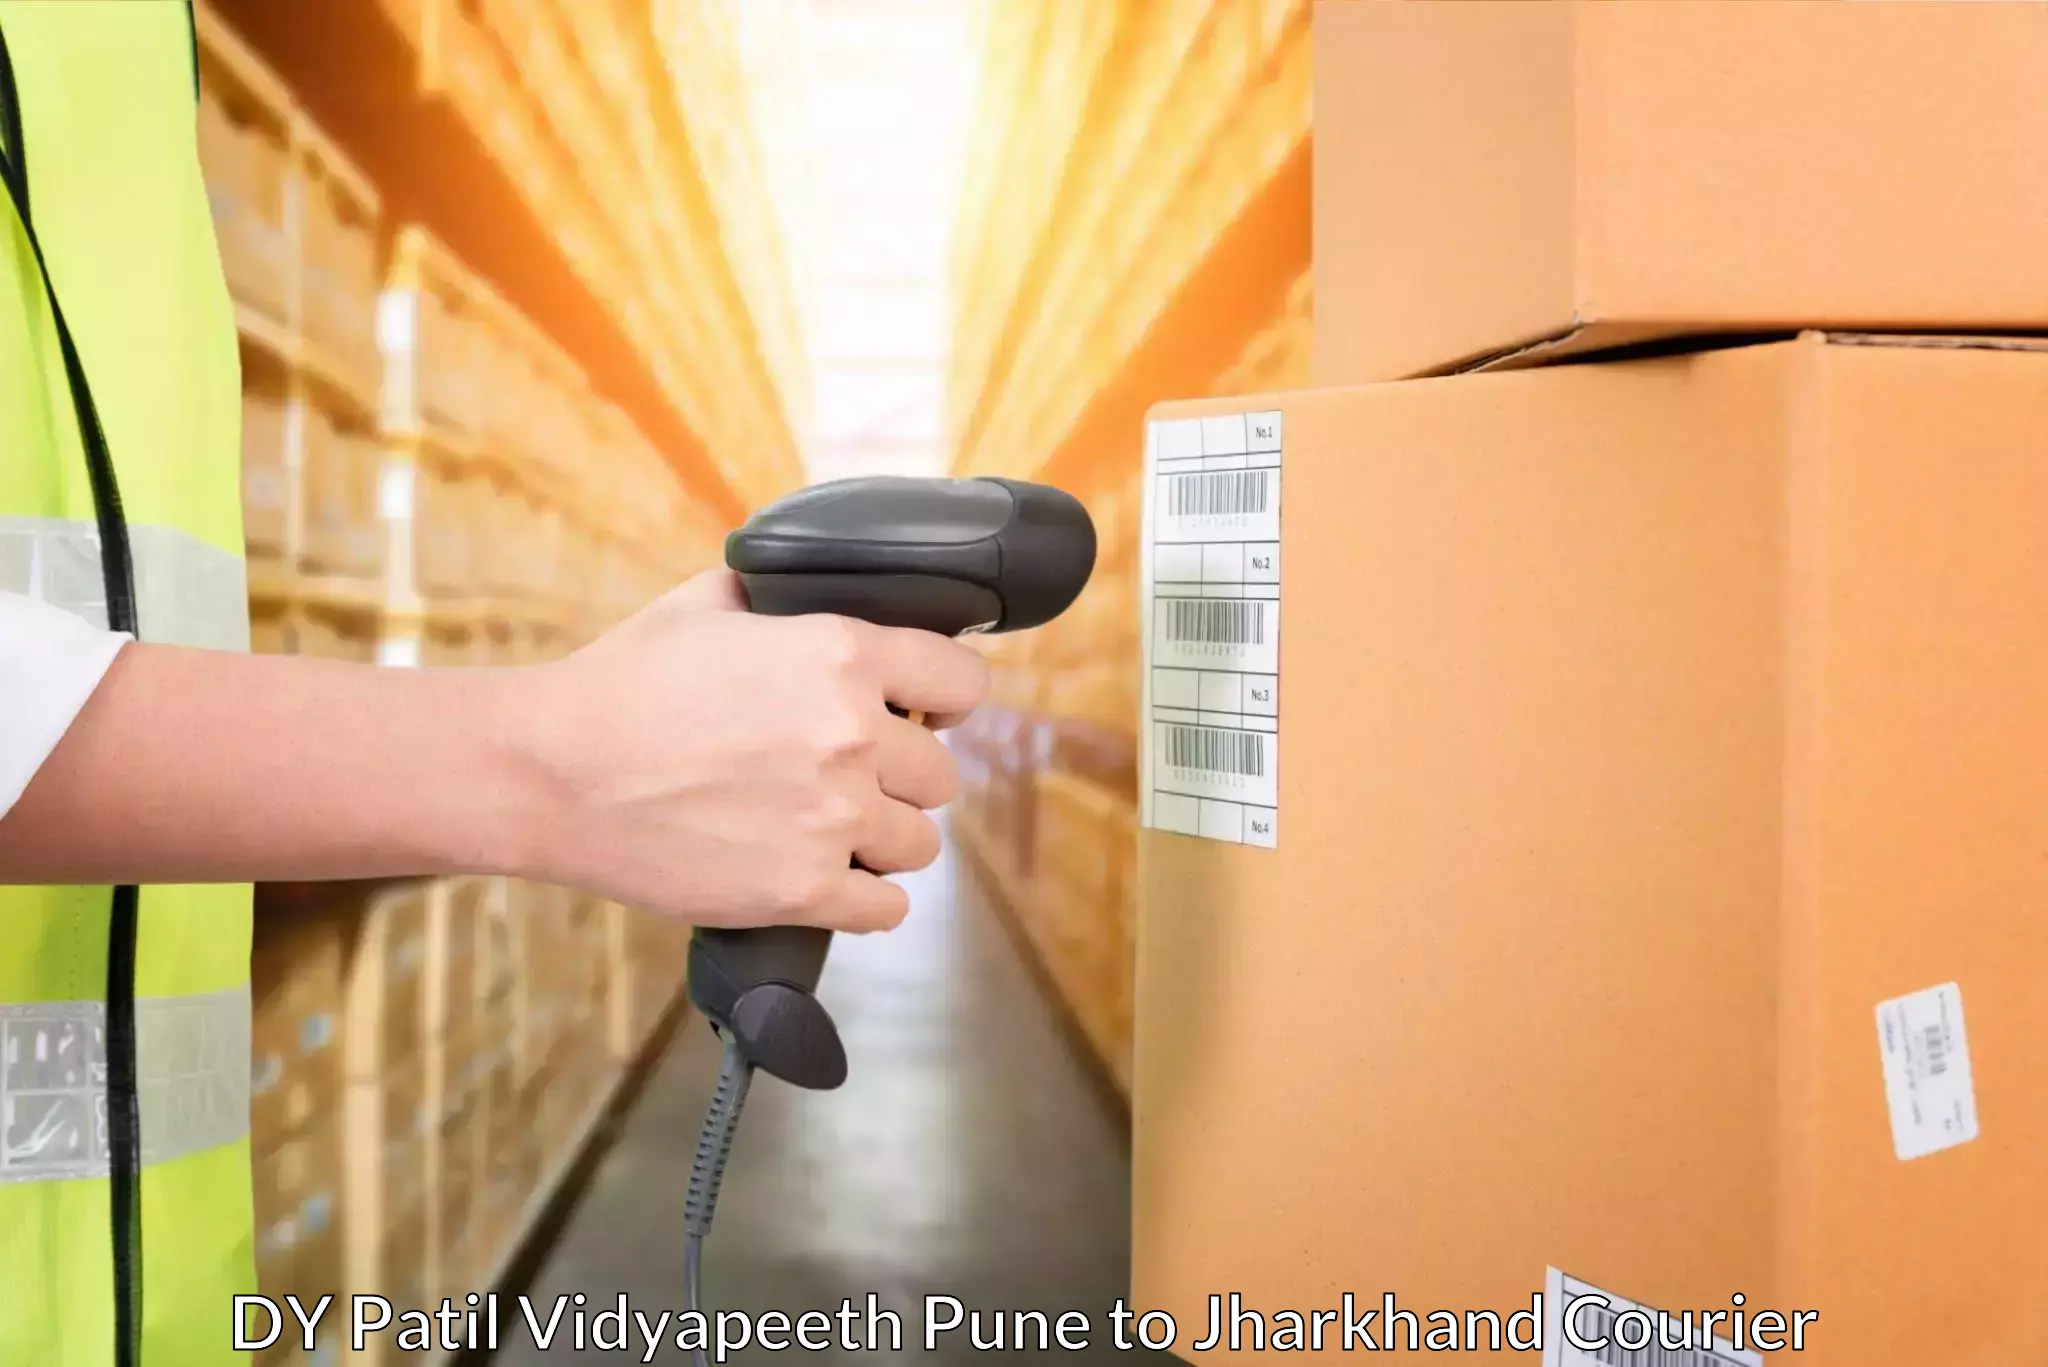 Premium delivery services DY Patil Vidyapeeth Pune to Ramgarh